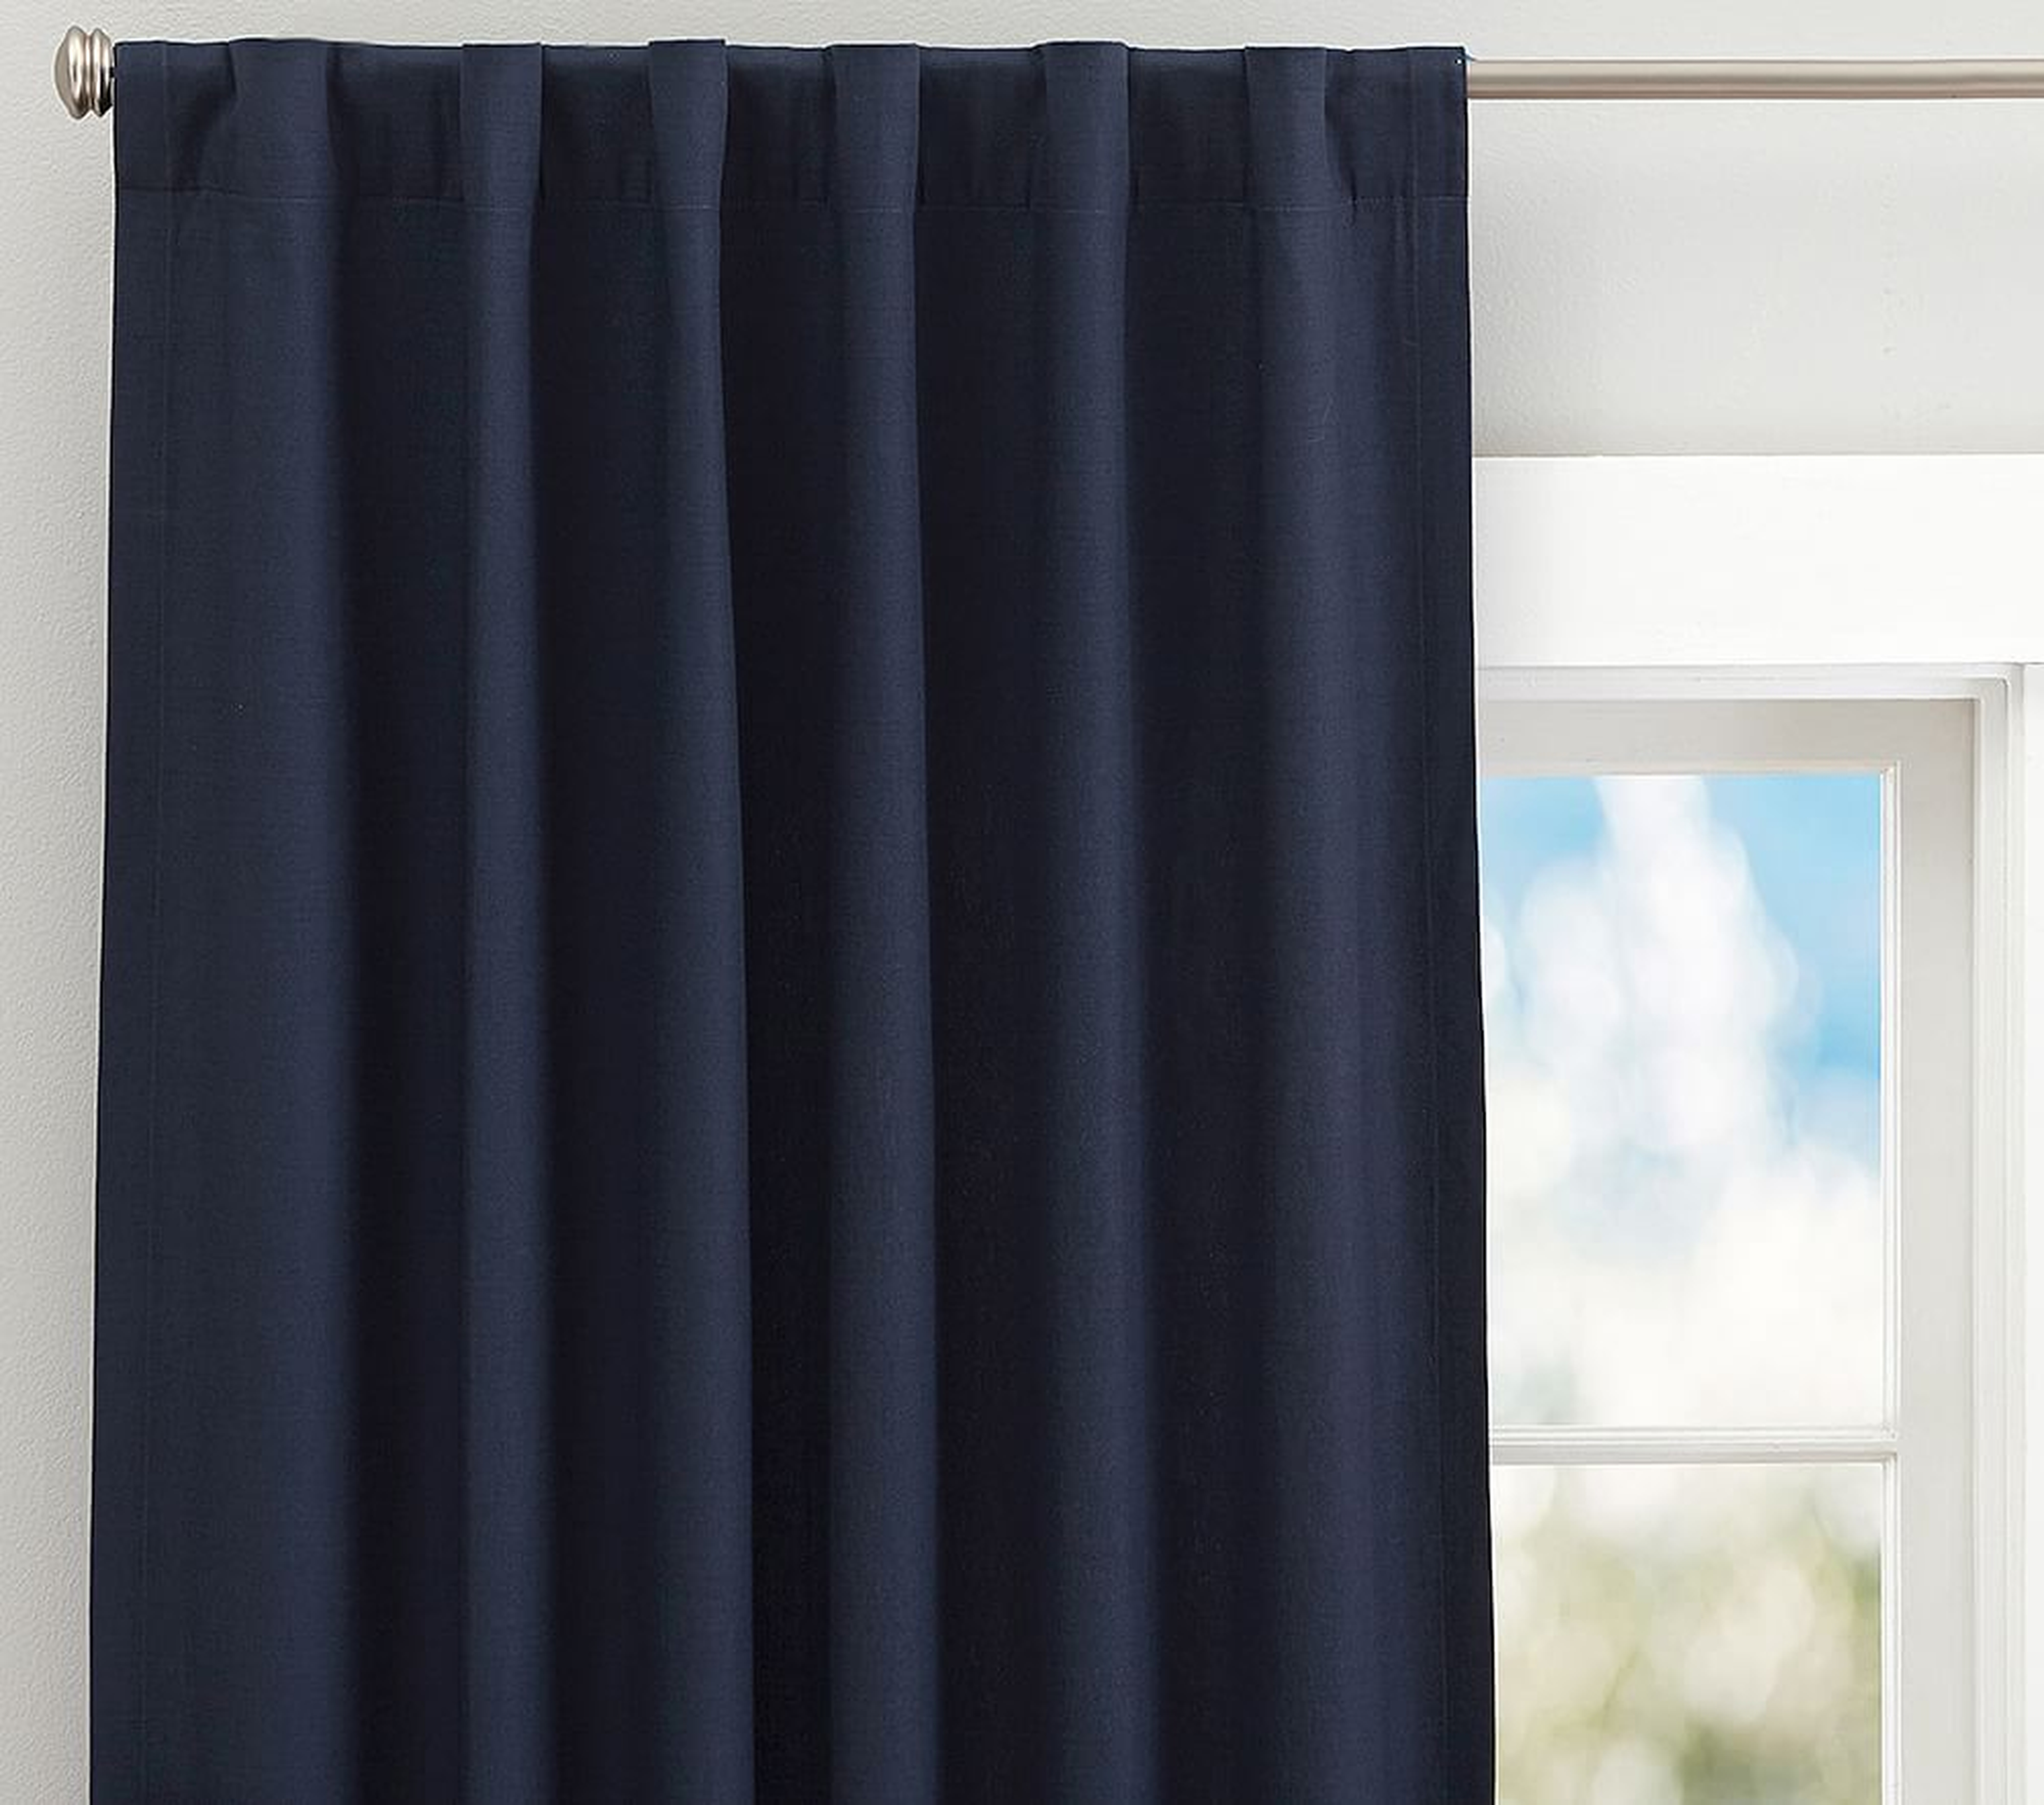 Classic Canvas Blackout Panel, 108 Inches, Navy, Set of 2 - Pottery Barn Kids